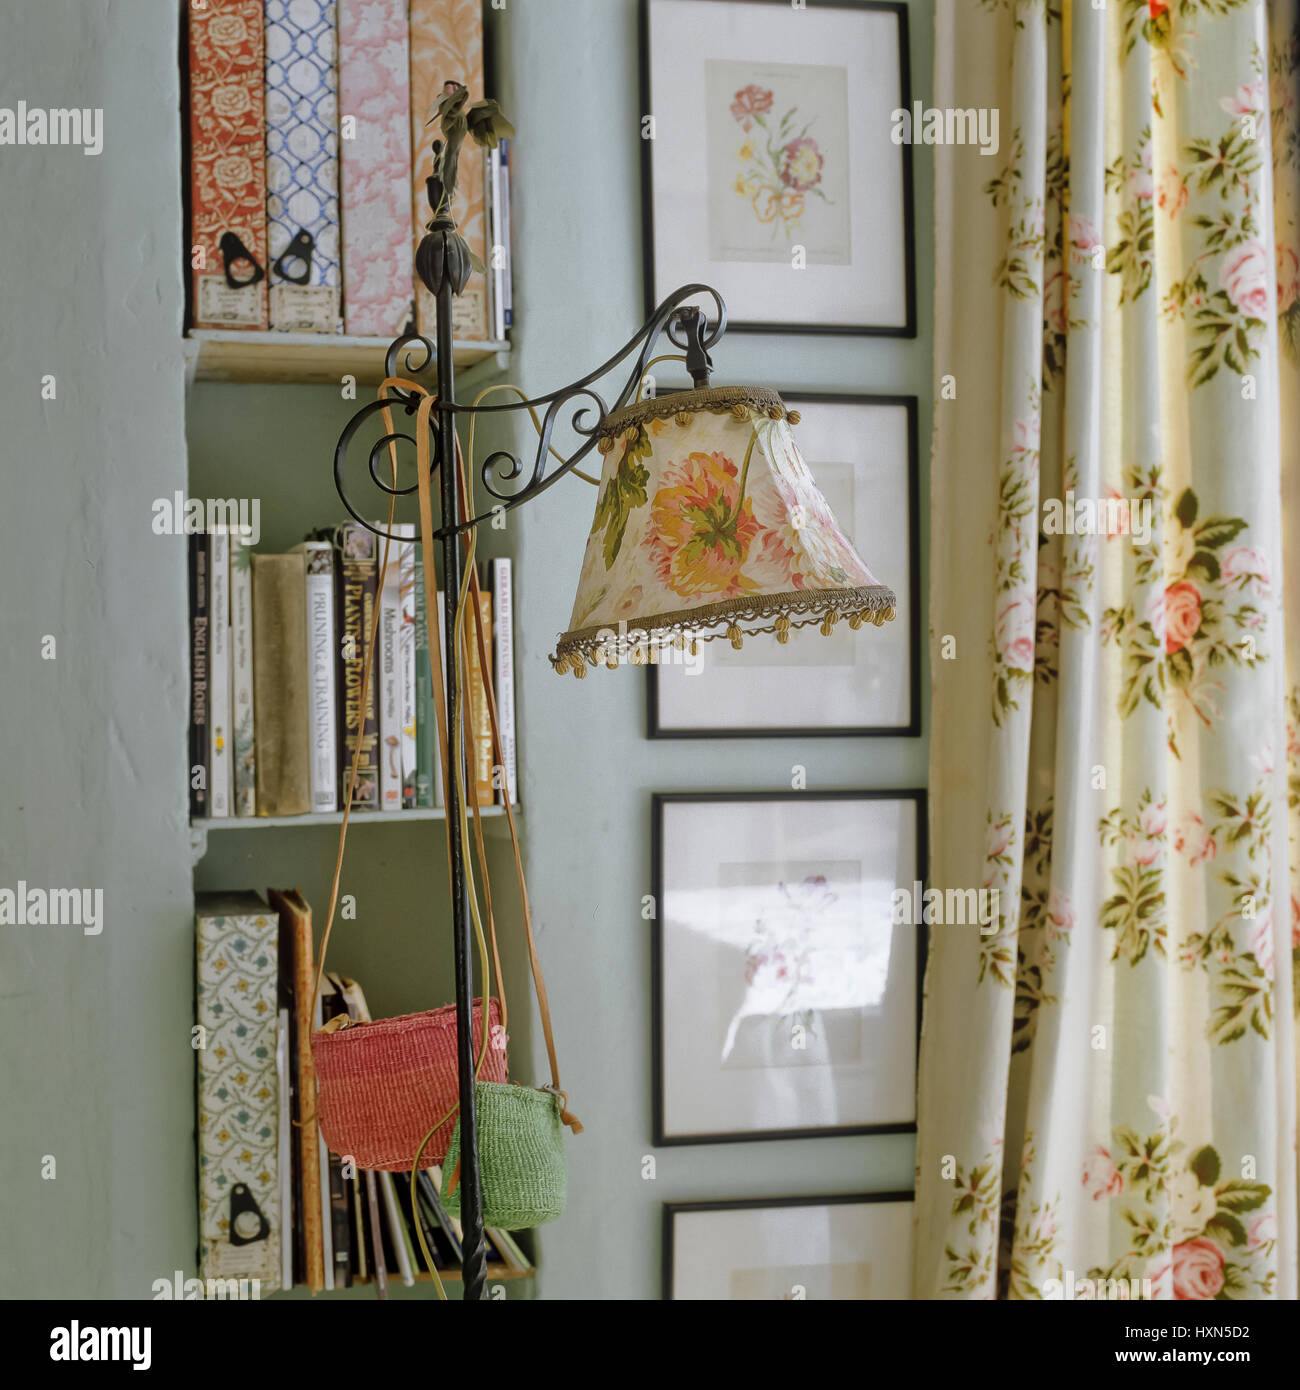 Bookcase beside floral patterned lamp. Stock Photo